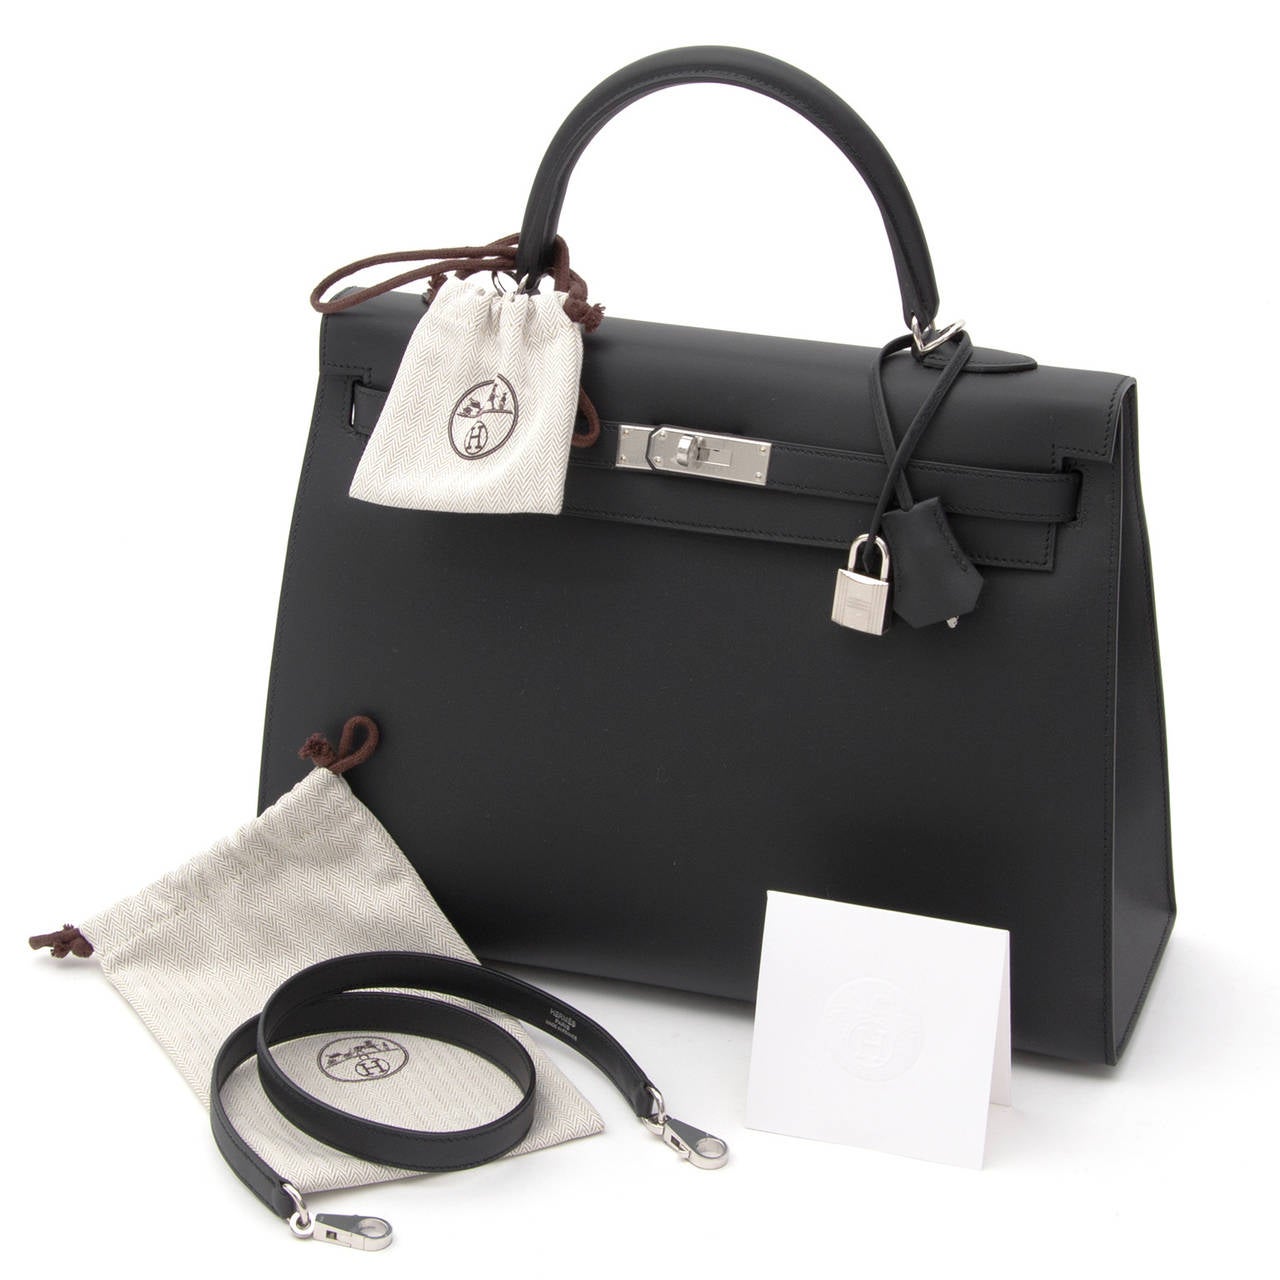 This brand new and Hermès Kelly bag in matte black Sombrero leather comes in its original invoice and box. It is packed with dustbag, raincoat, clochette cadenas keyholder and padlock. 

Nobody ever wore this bag. The plastic covers are still on